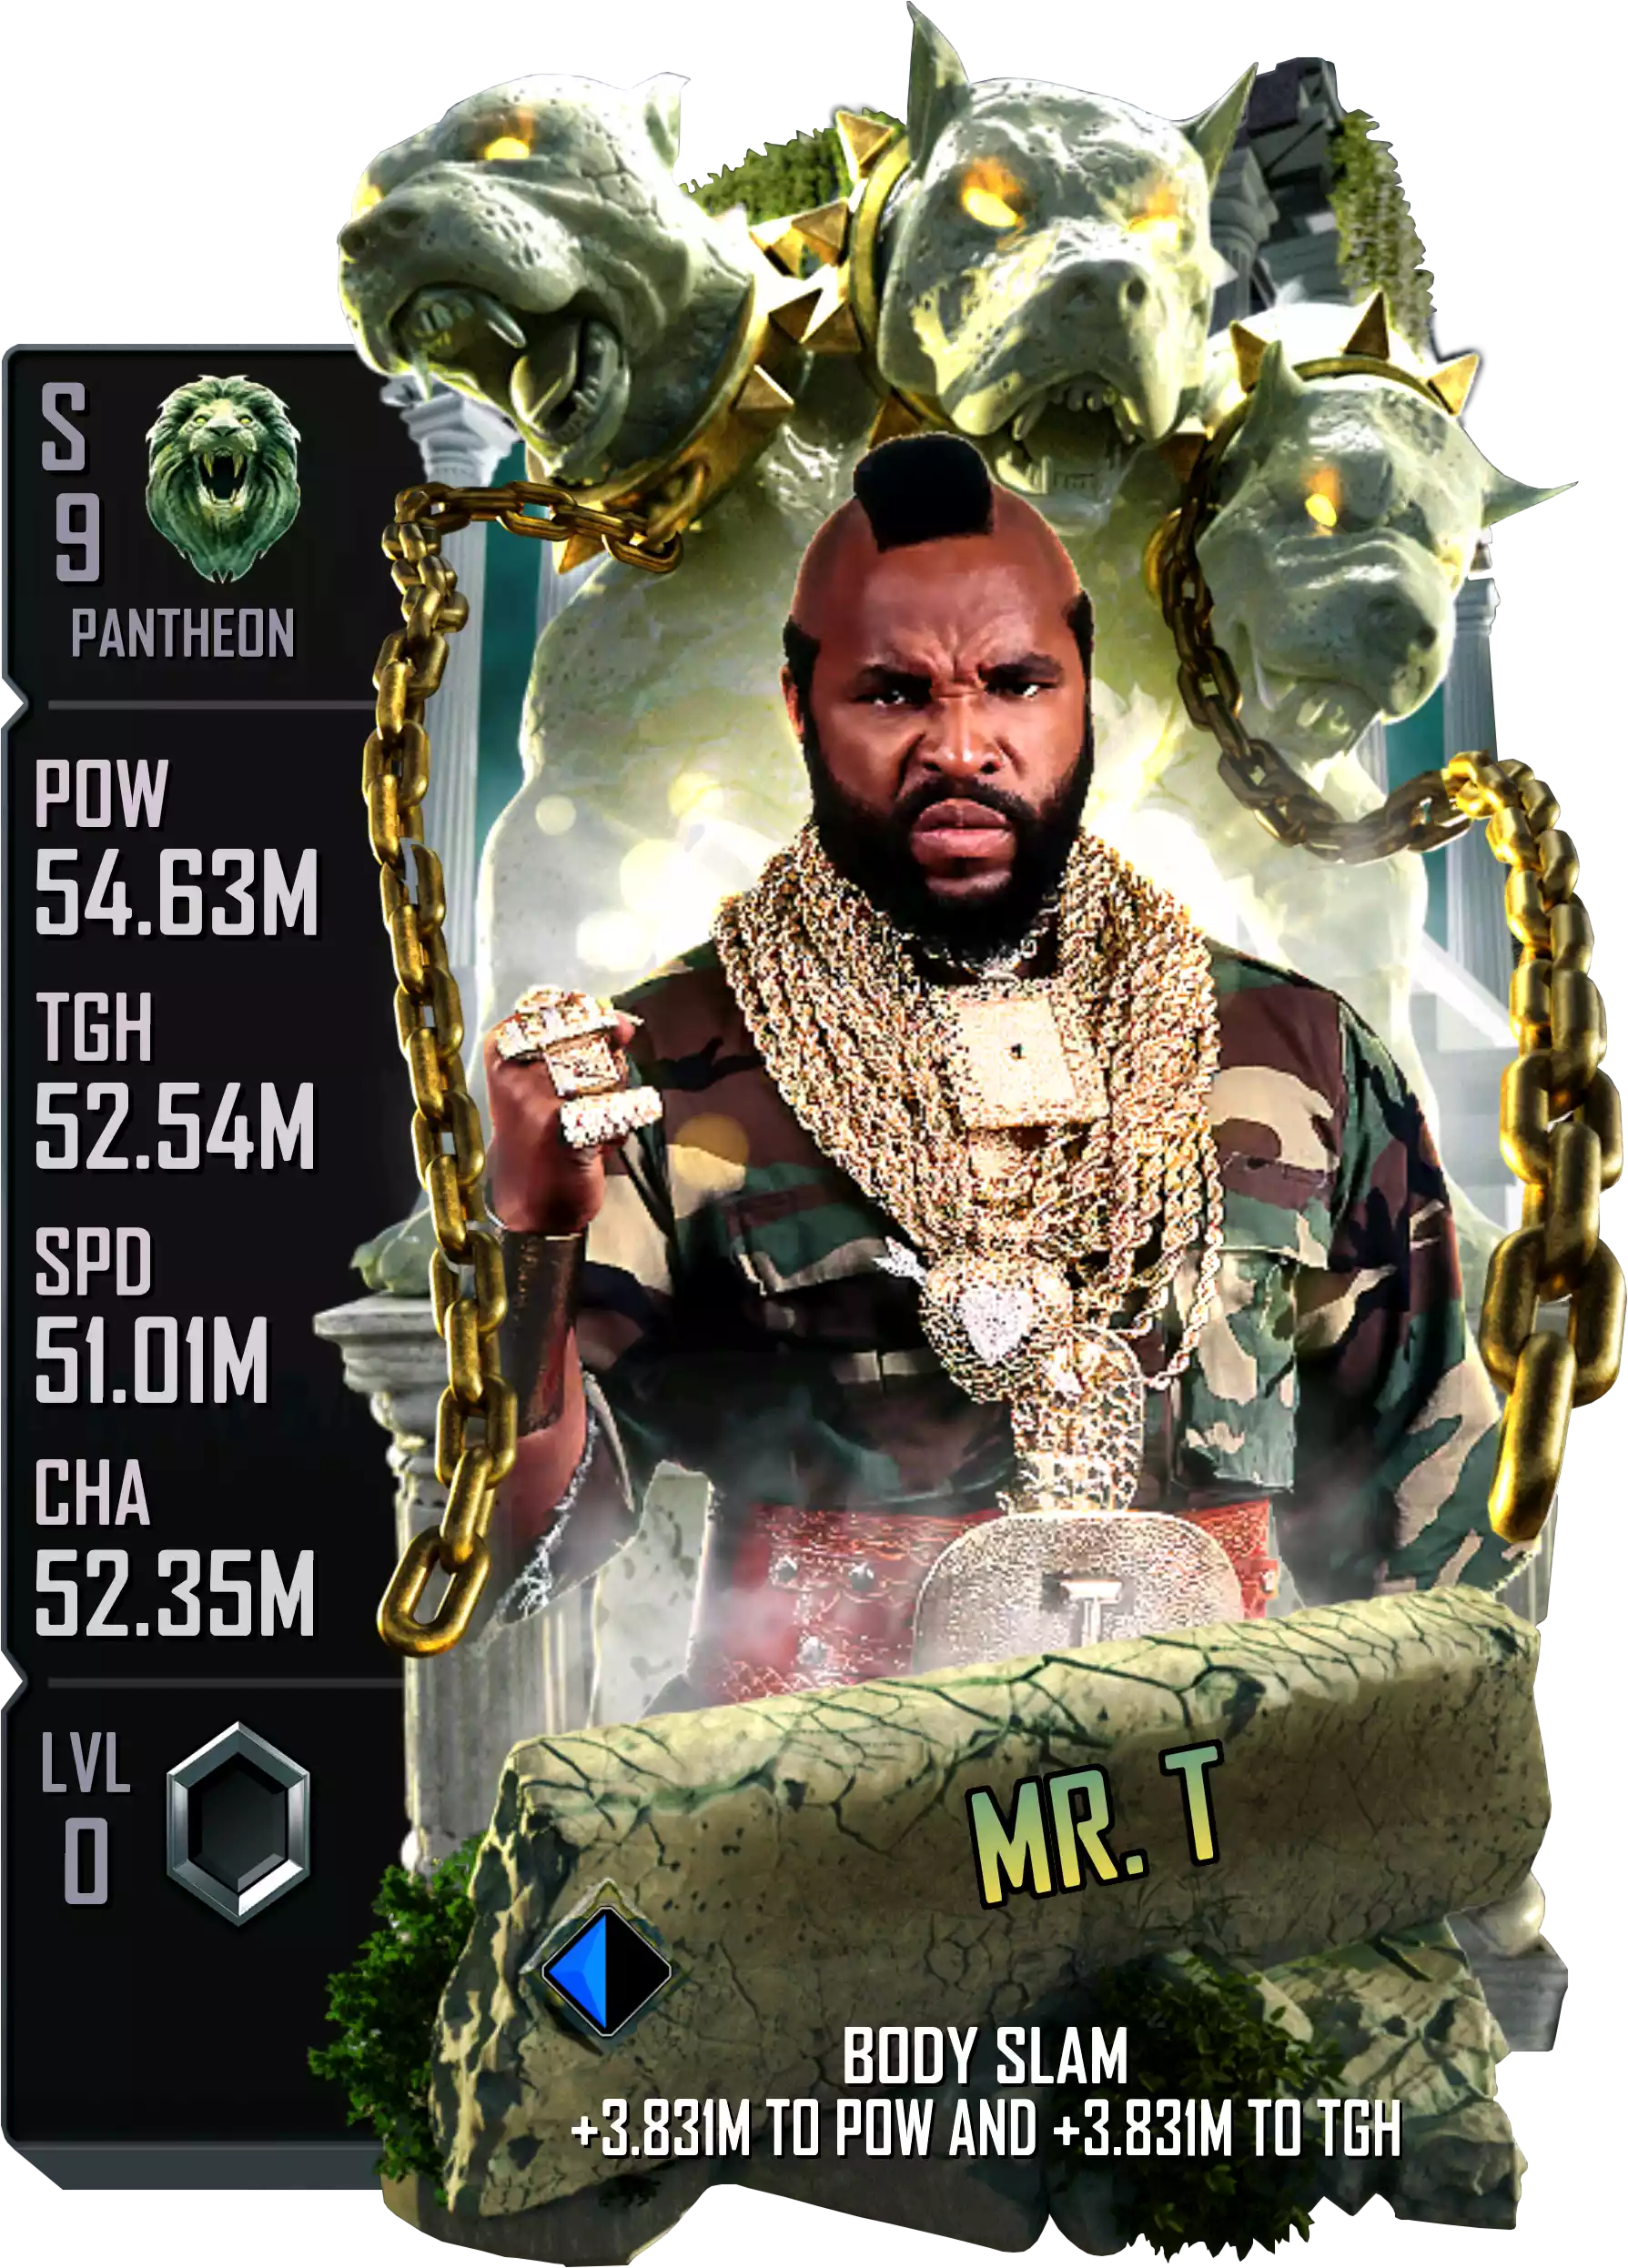 Pantheon, Mr. T, Fusion Card from WWE Supercard